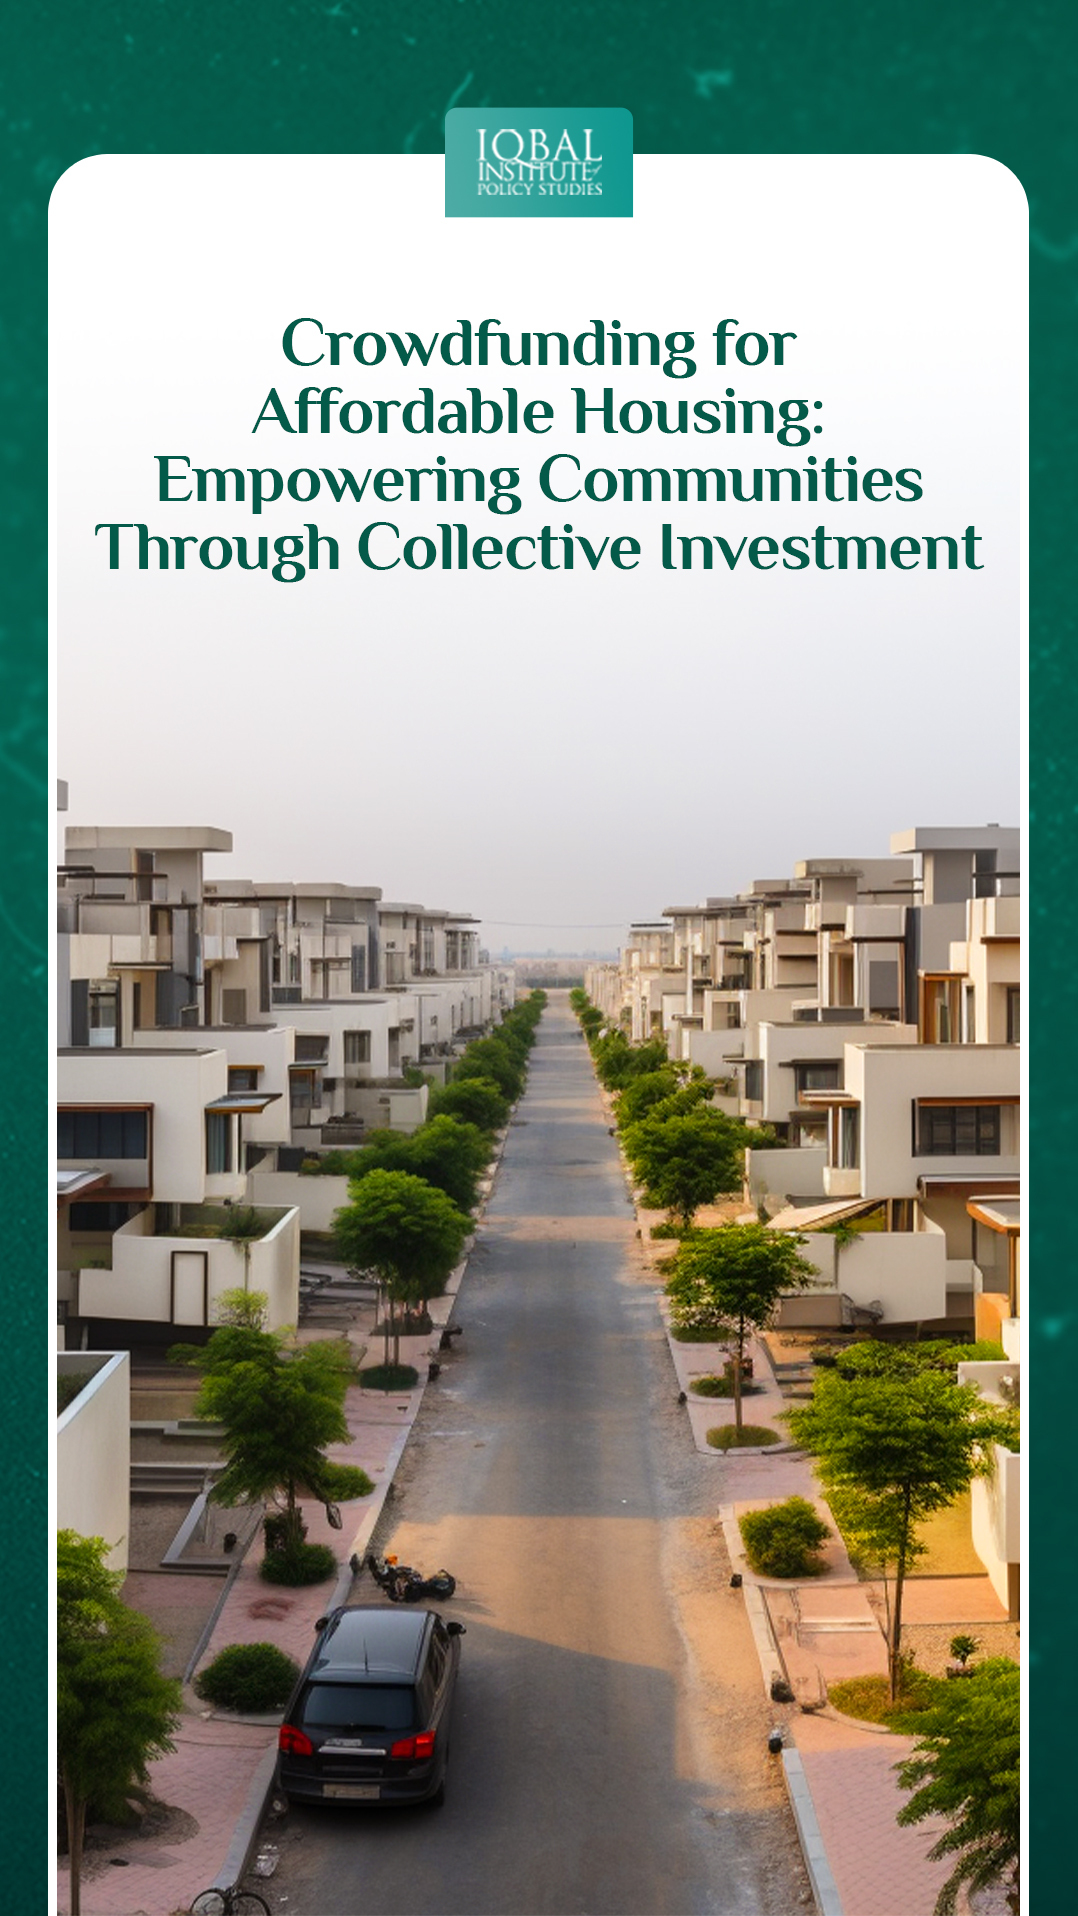 Crowdfunding for Affordable Housing: Empowering Communities through Collective Investment